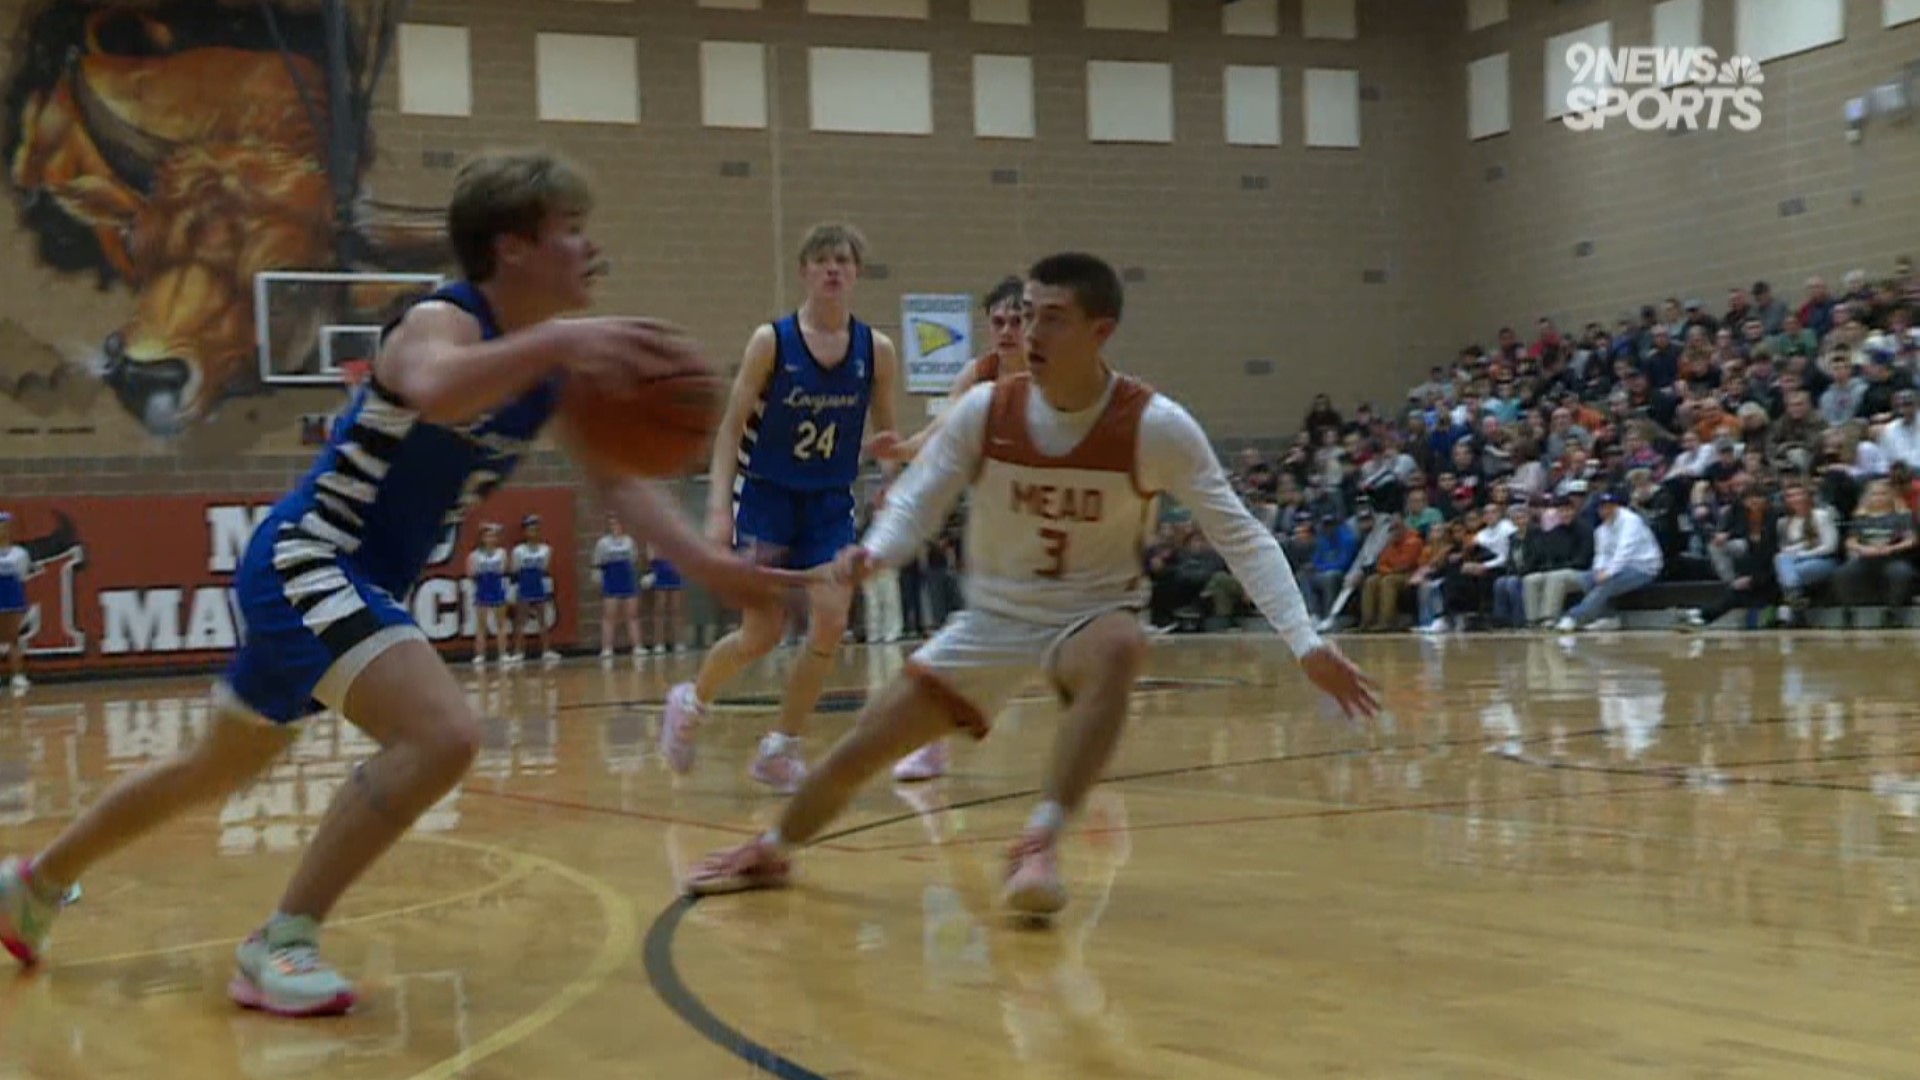 The Mavericks won their ninth game in a row Friday night with a 57-46 victory over the Trojans.